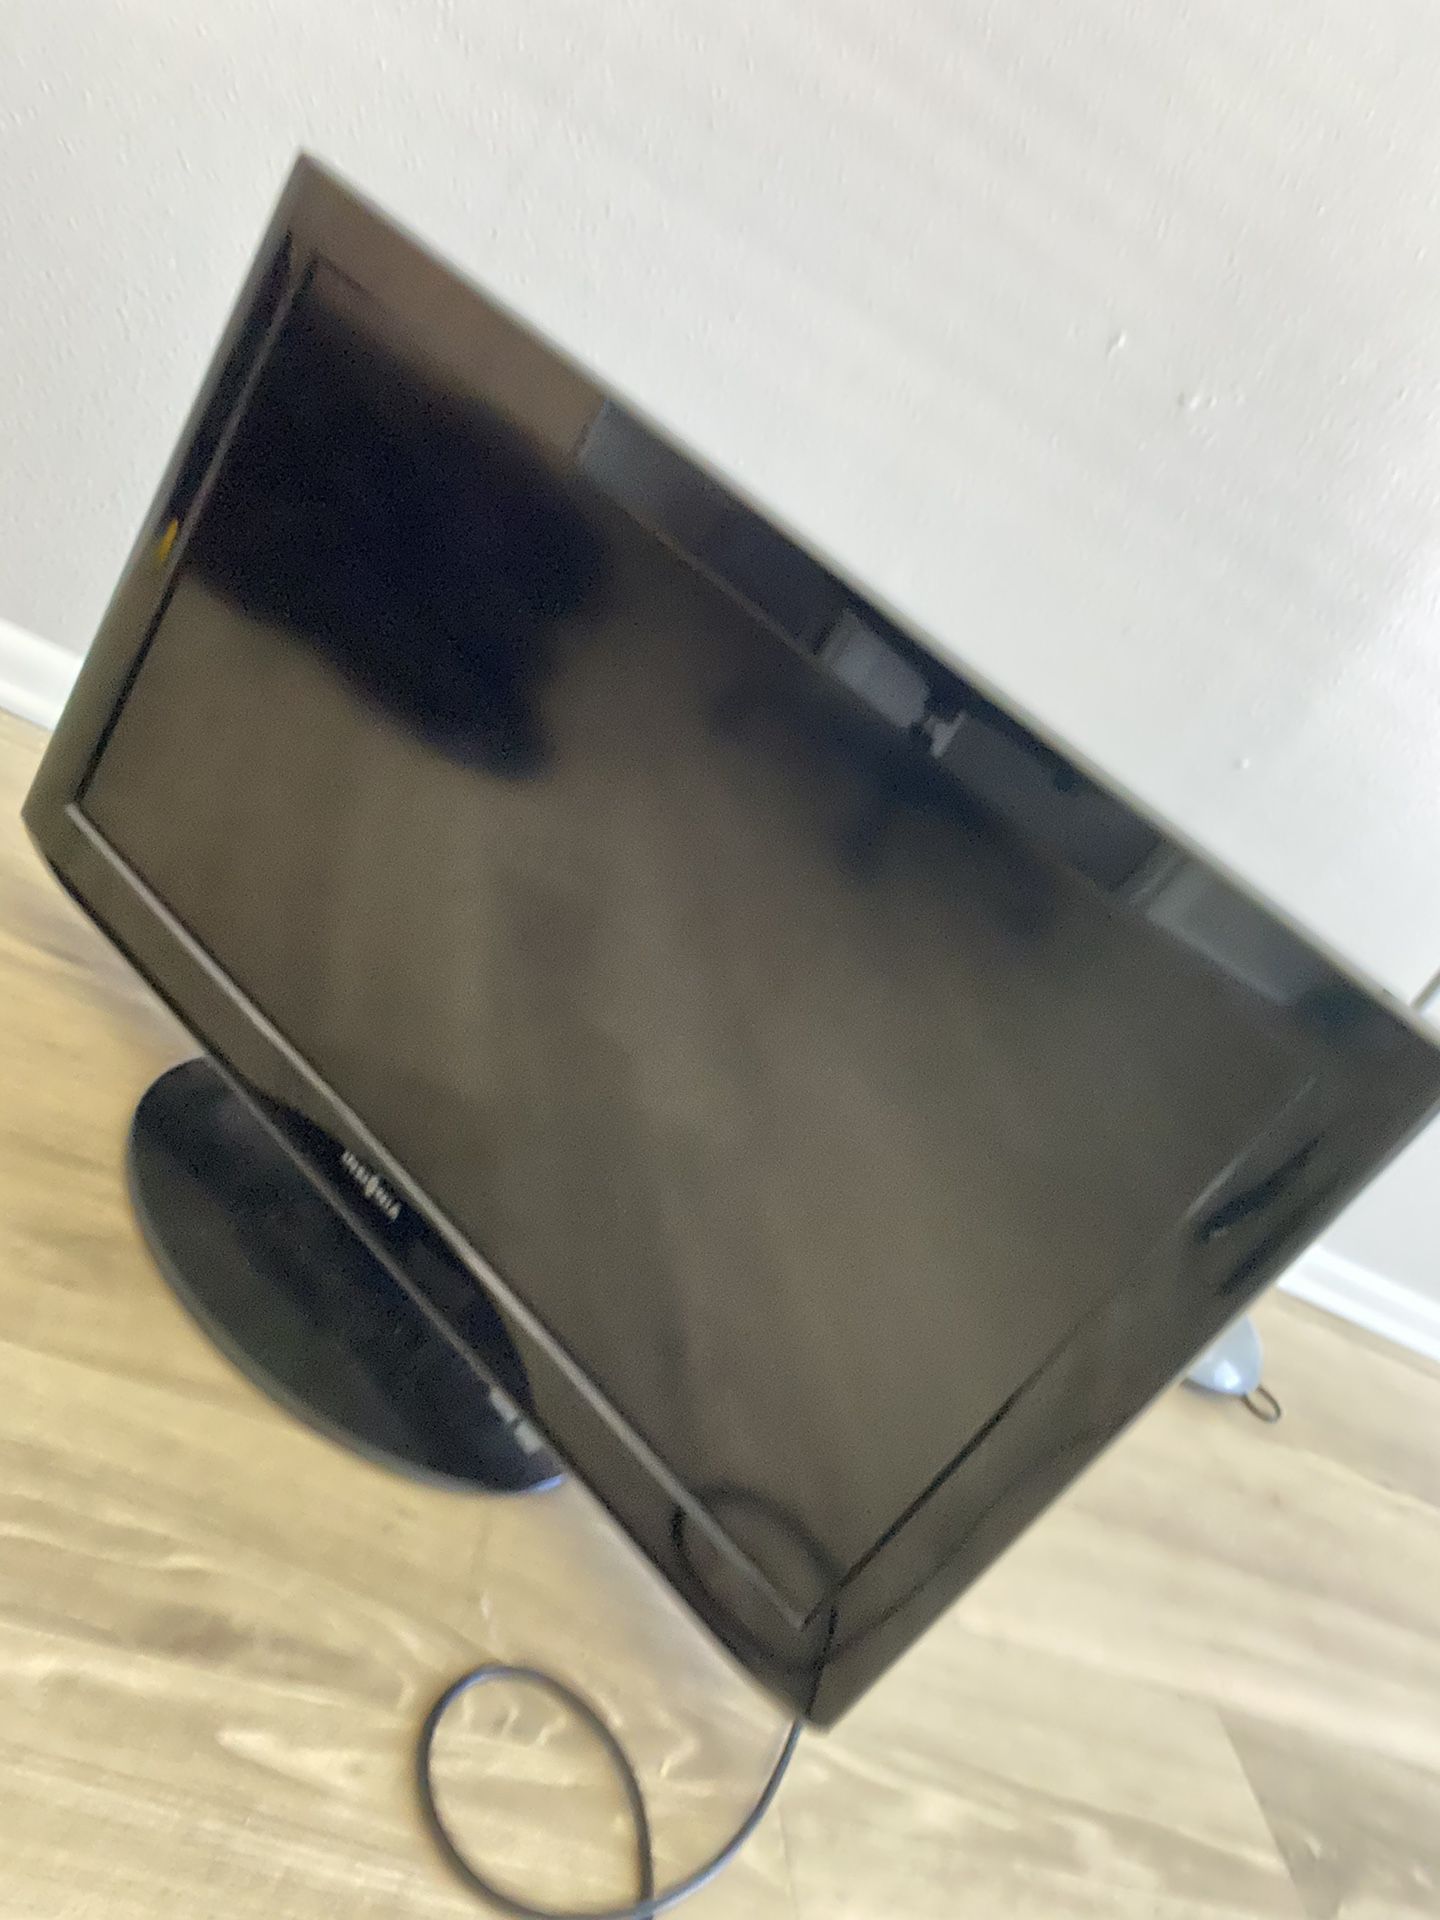 32 inch TV with DVD